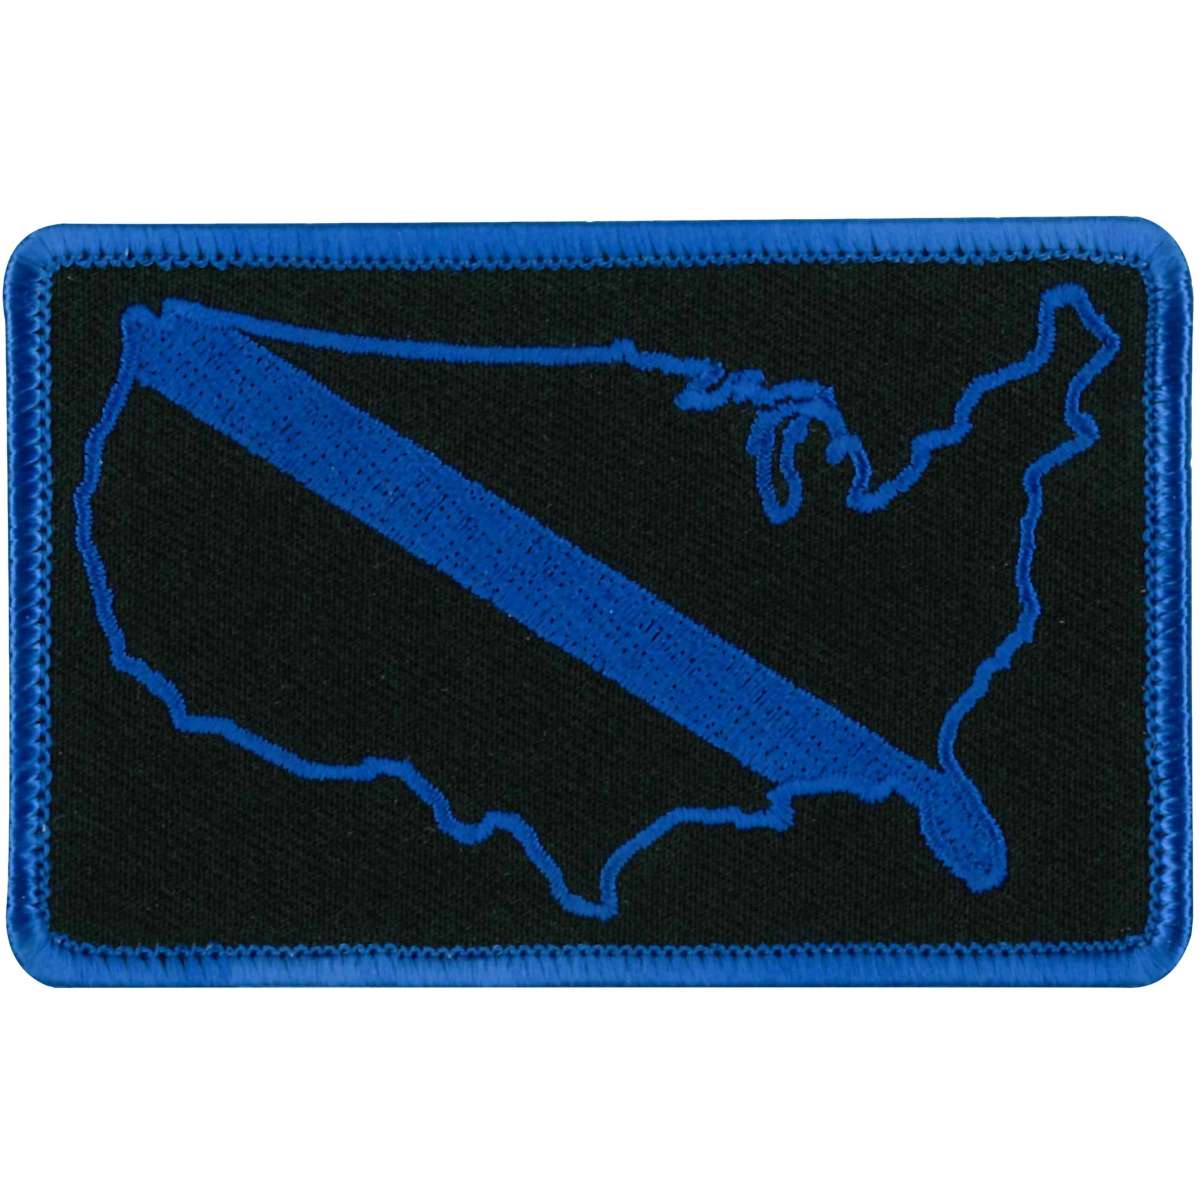 Hot Leathers USA FALLEN POLICE Patch PPL9625